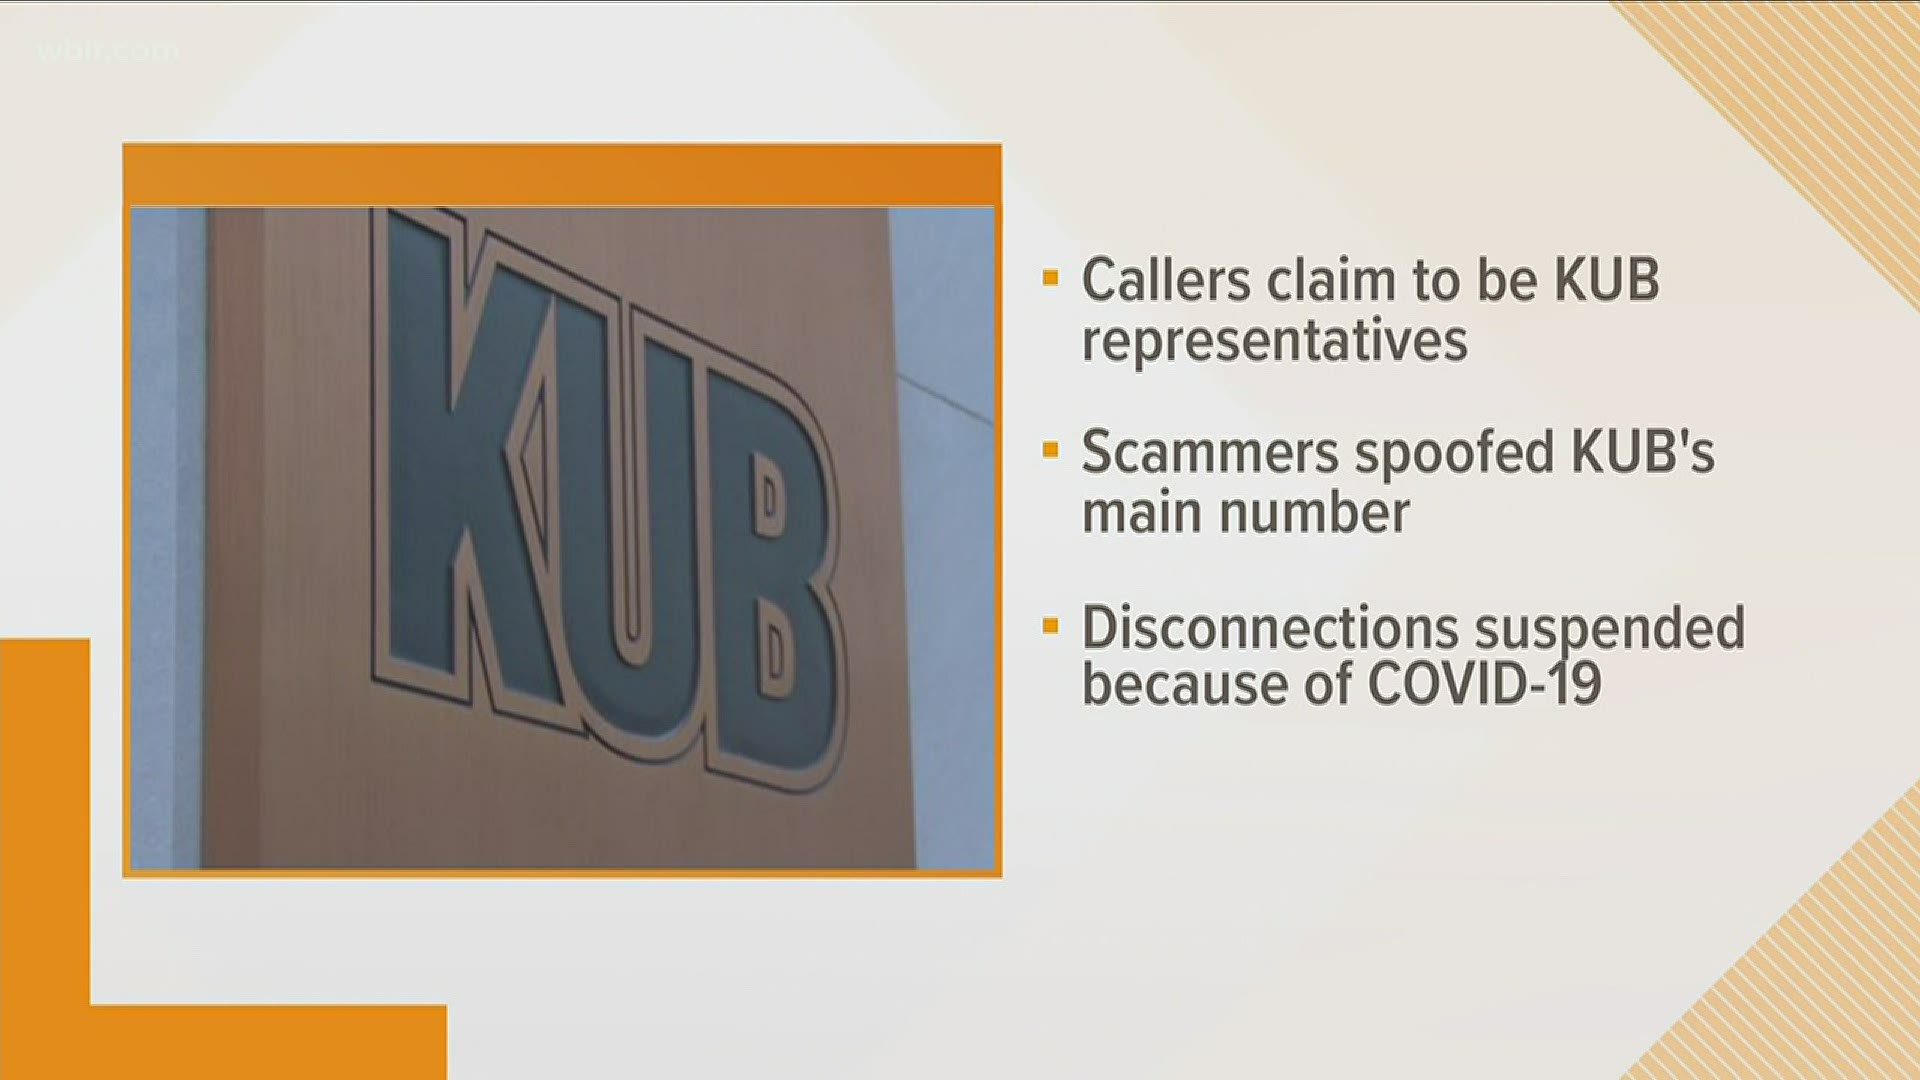 KUB says people are claiming to be KUB representatives and threatening to disconnect people's utilities unless a balance is paid.